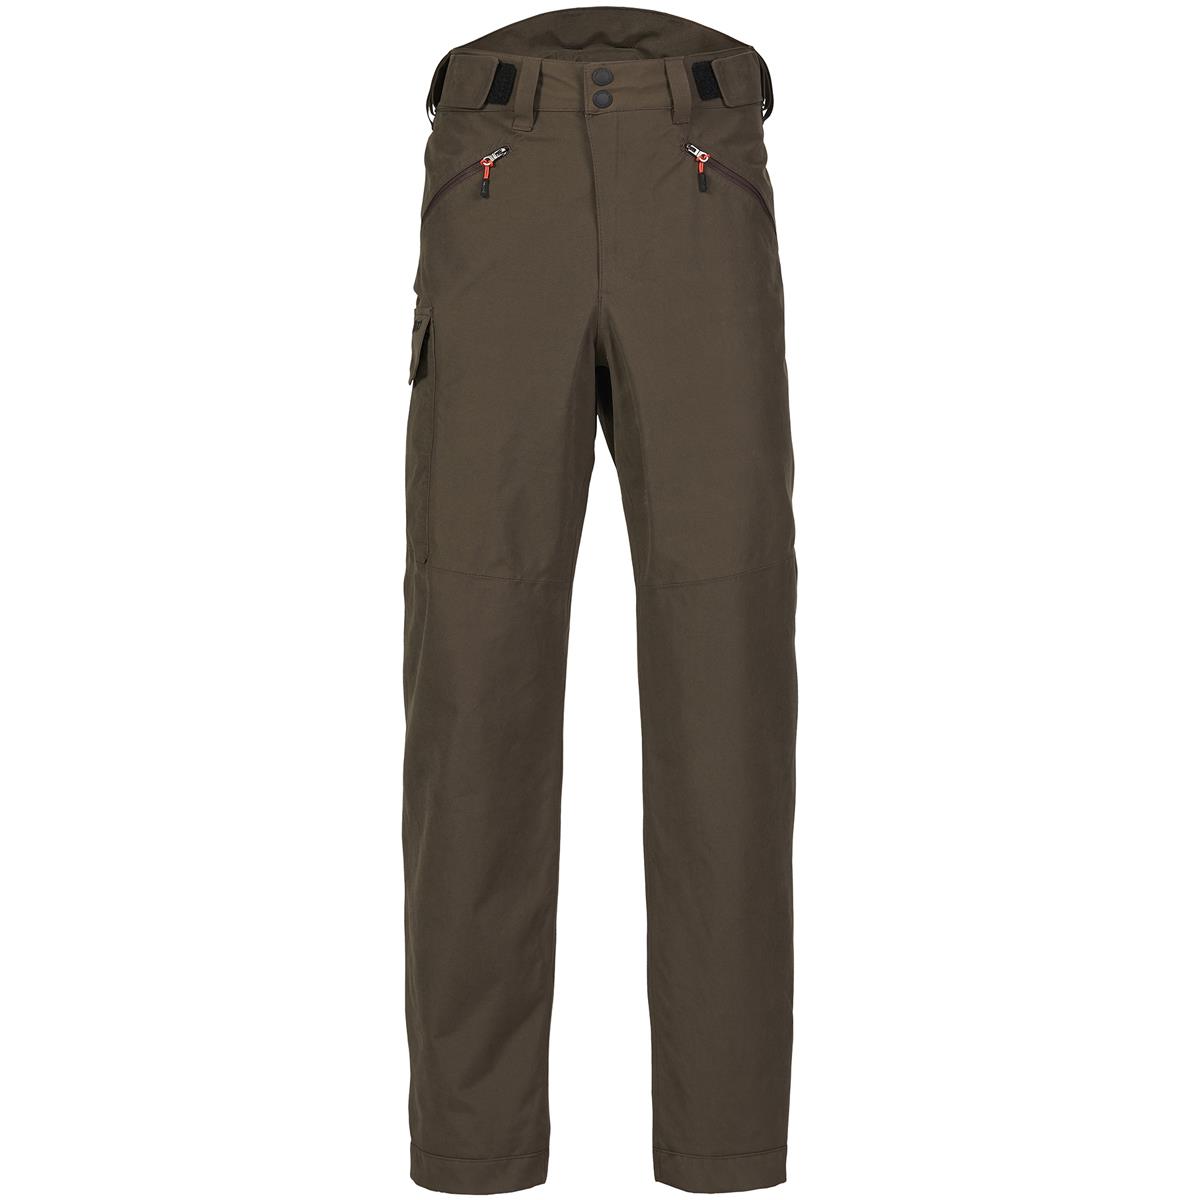 Are Musto HTX Keeper trousers suitable for winter warmth?